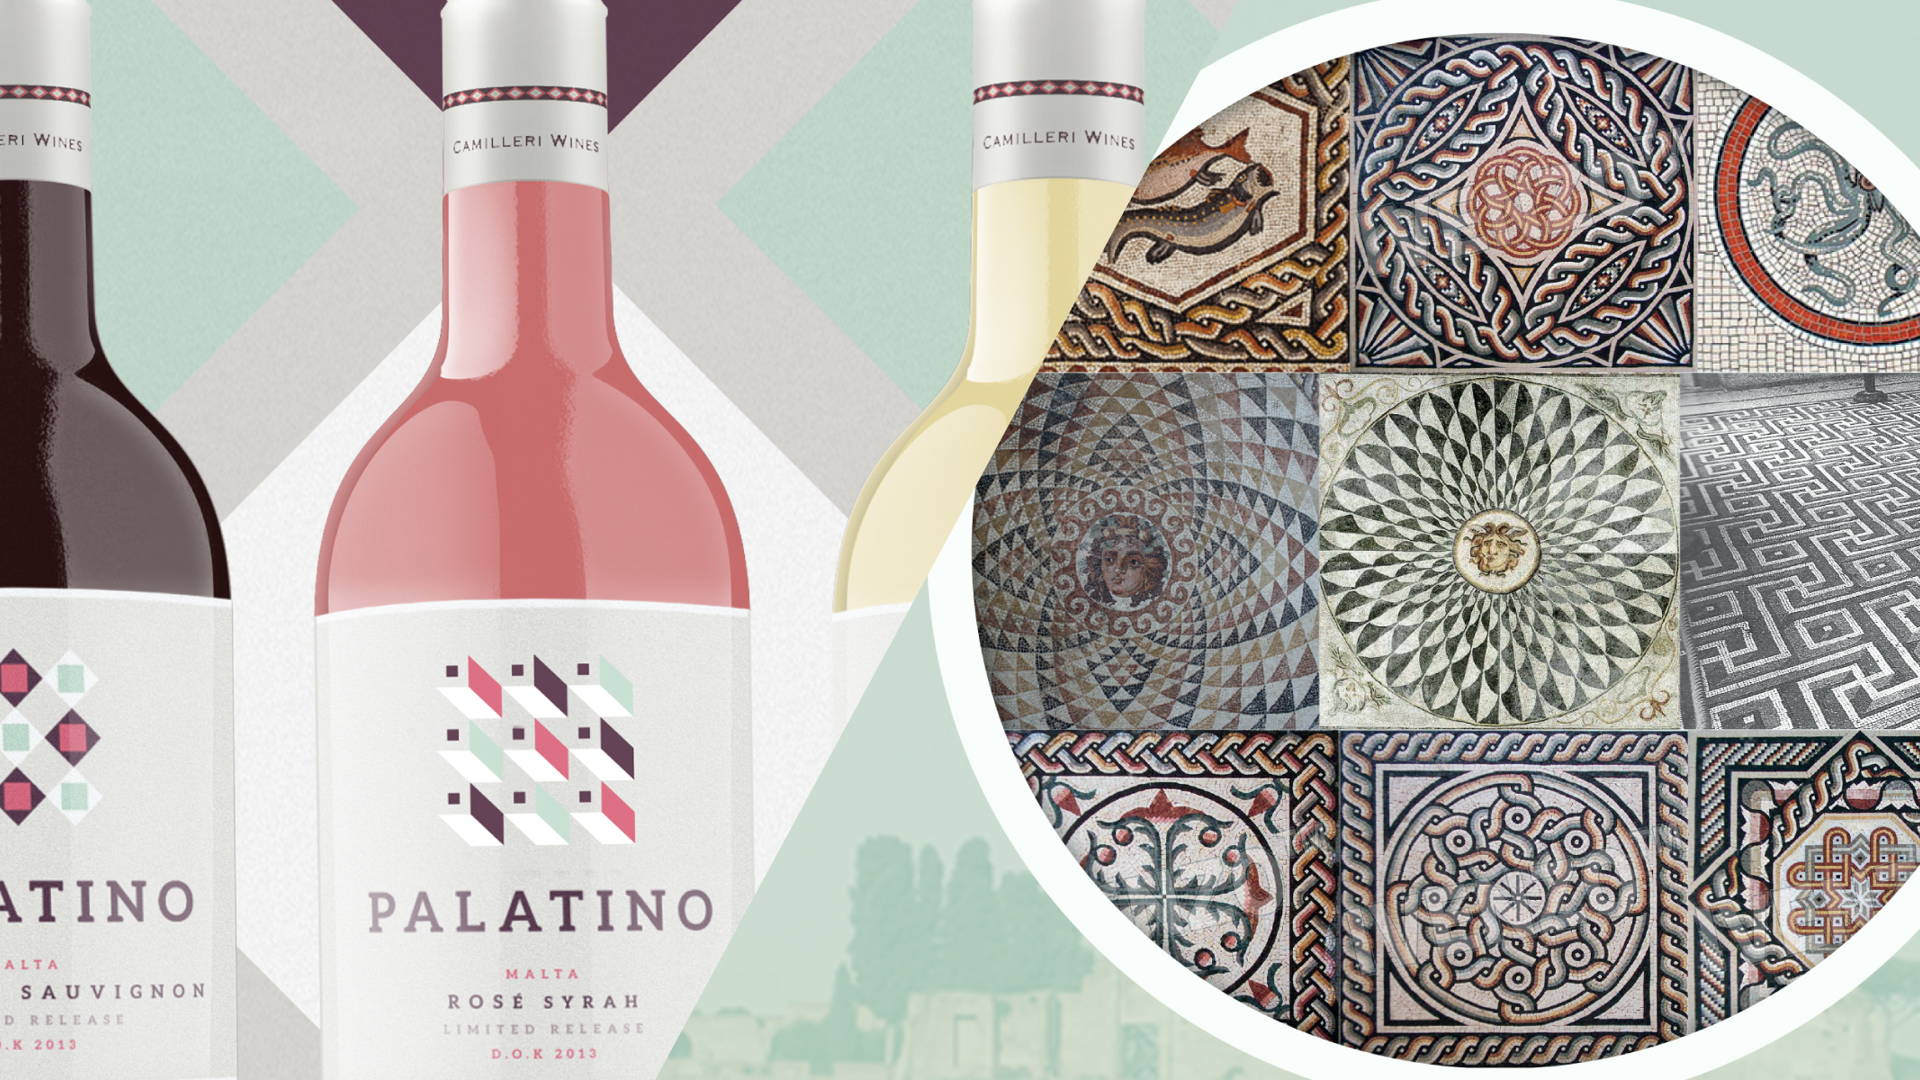 Featured image for Palatino Wines